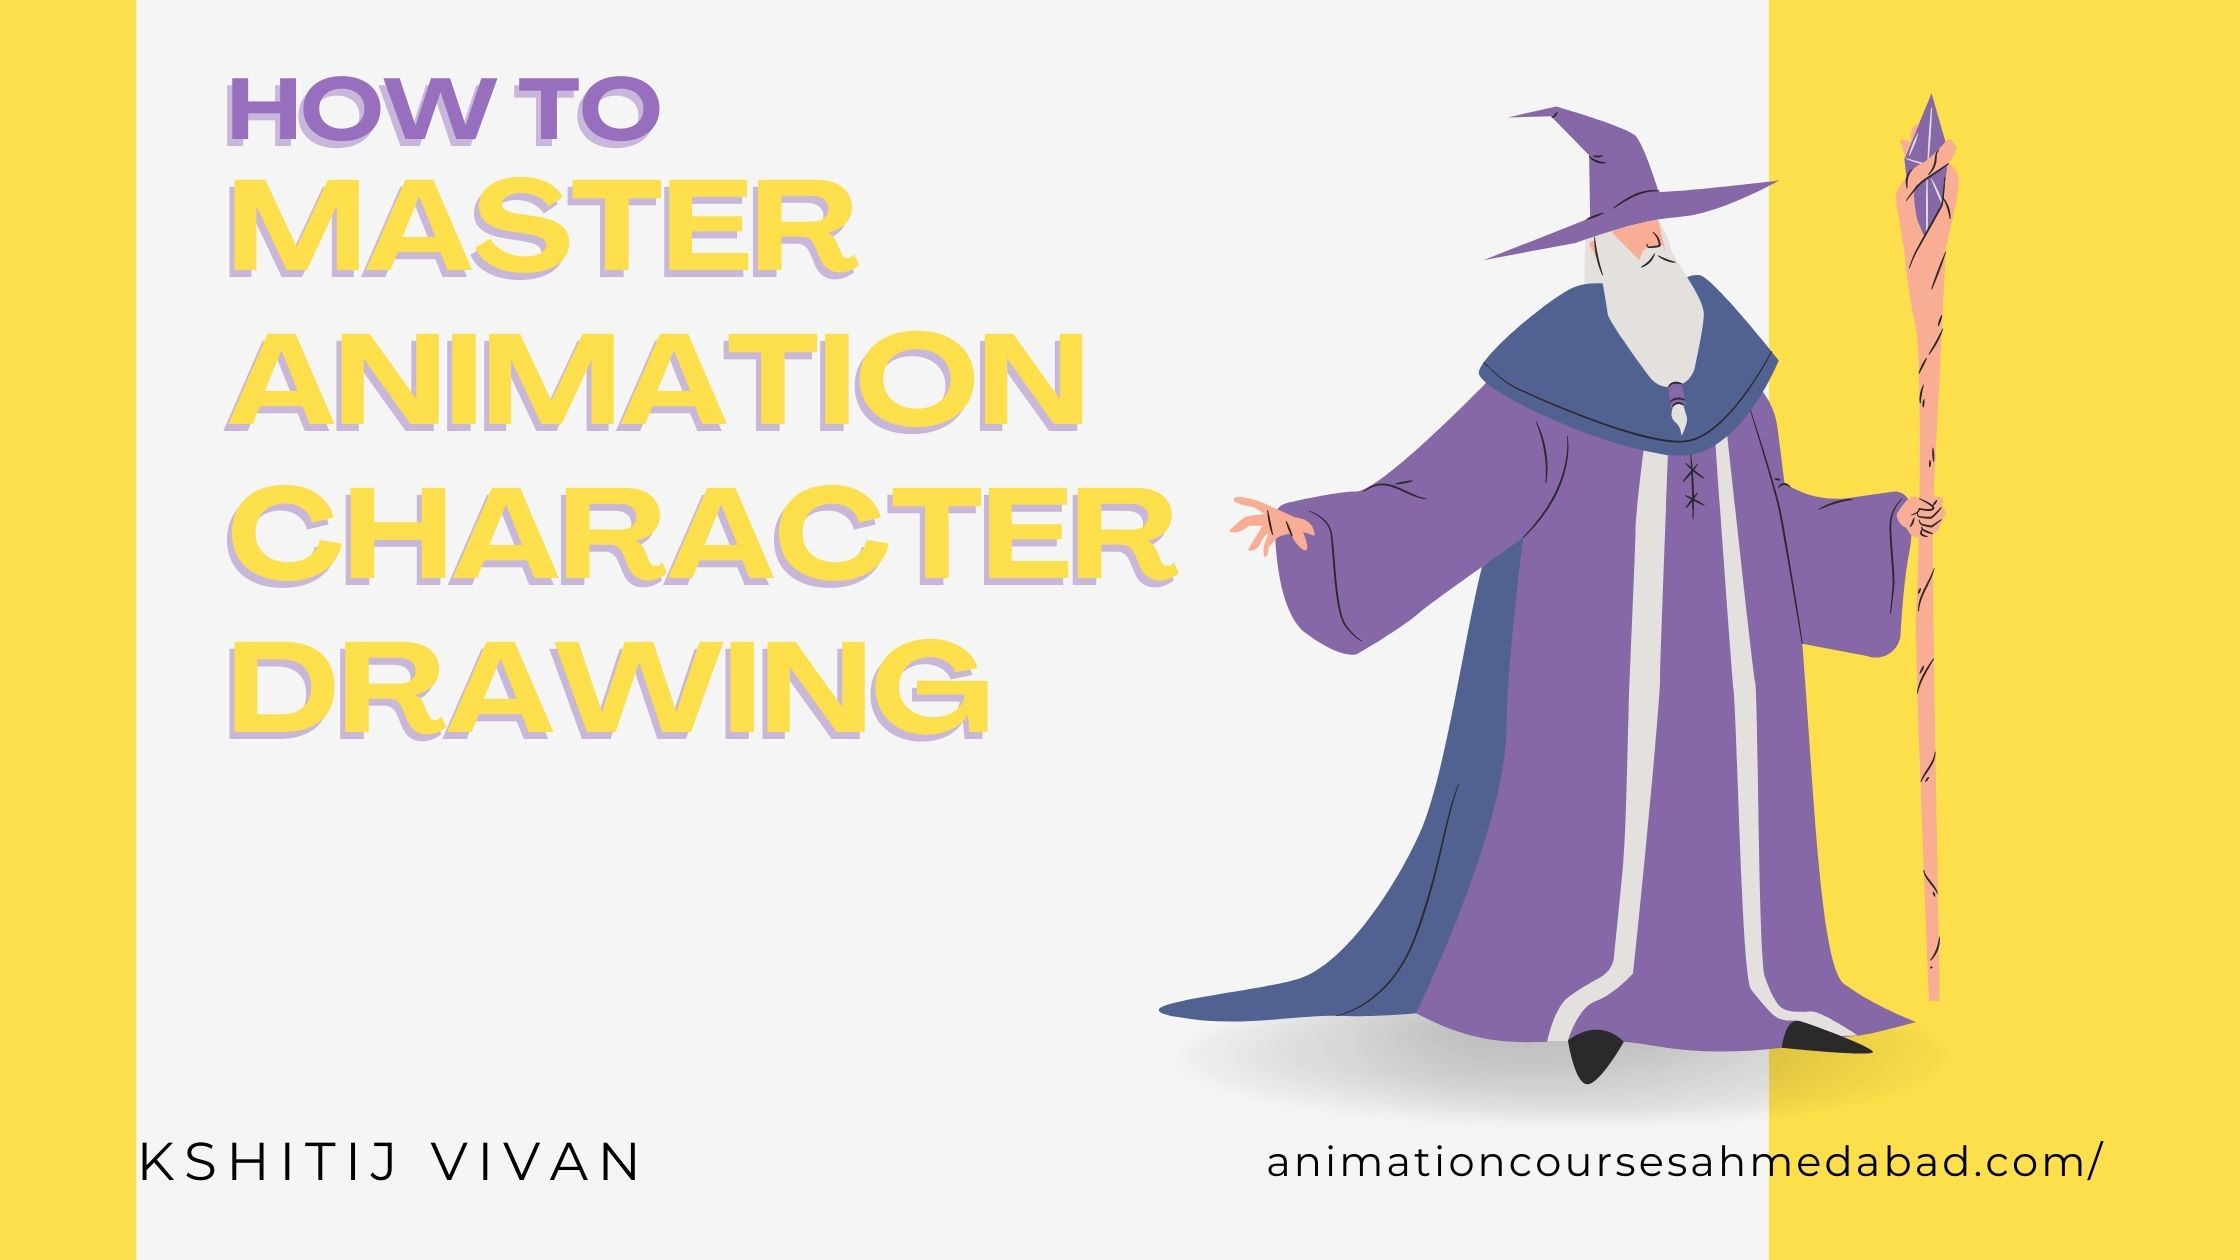 How to Master Animation Character Drawing and 7 Steps To Draw Animation Character